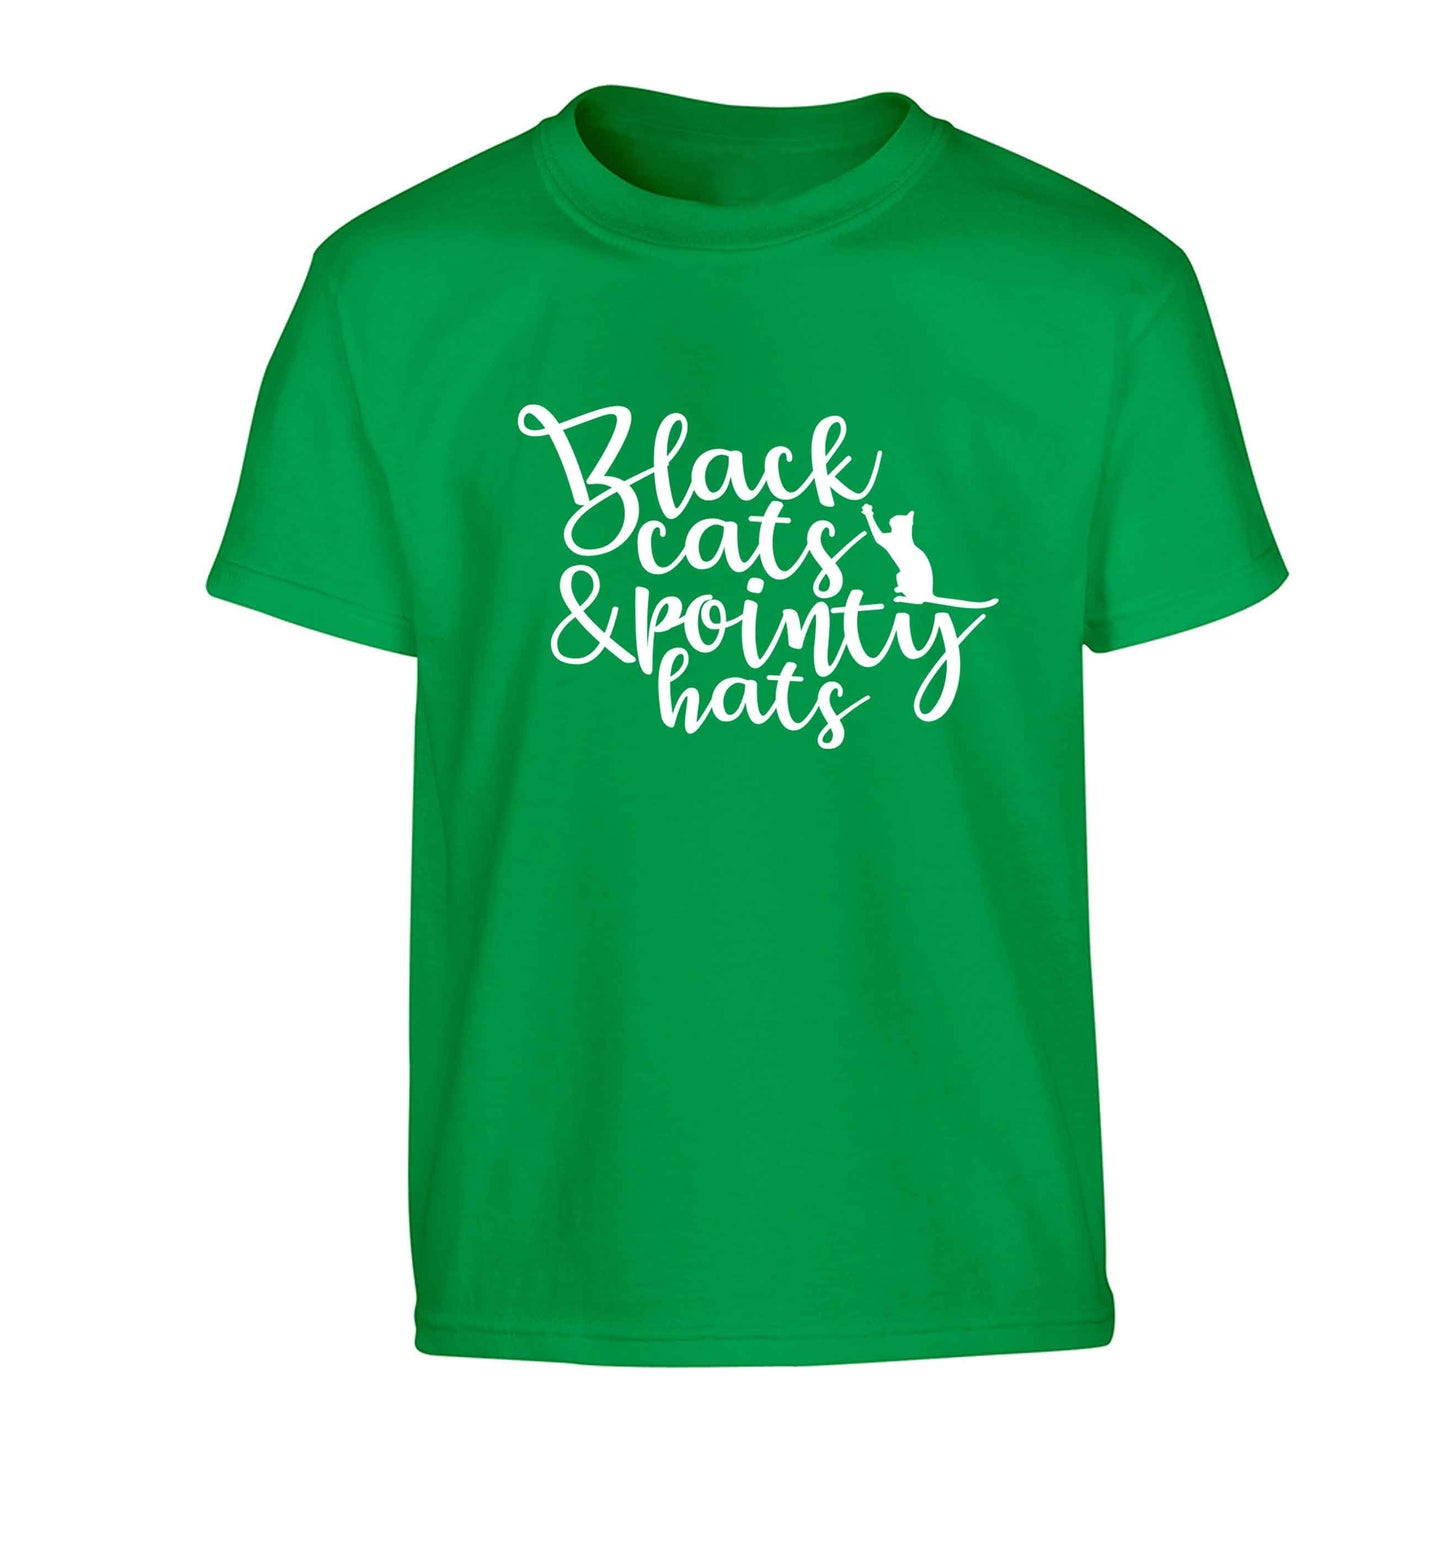 Black cats and pointy hats Children's green Tshirt 12-13 Years